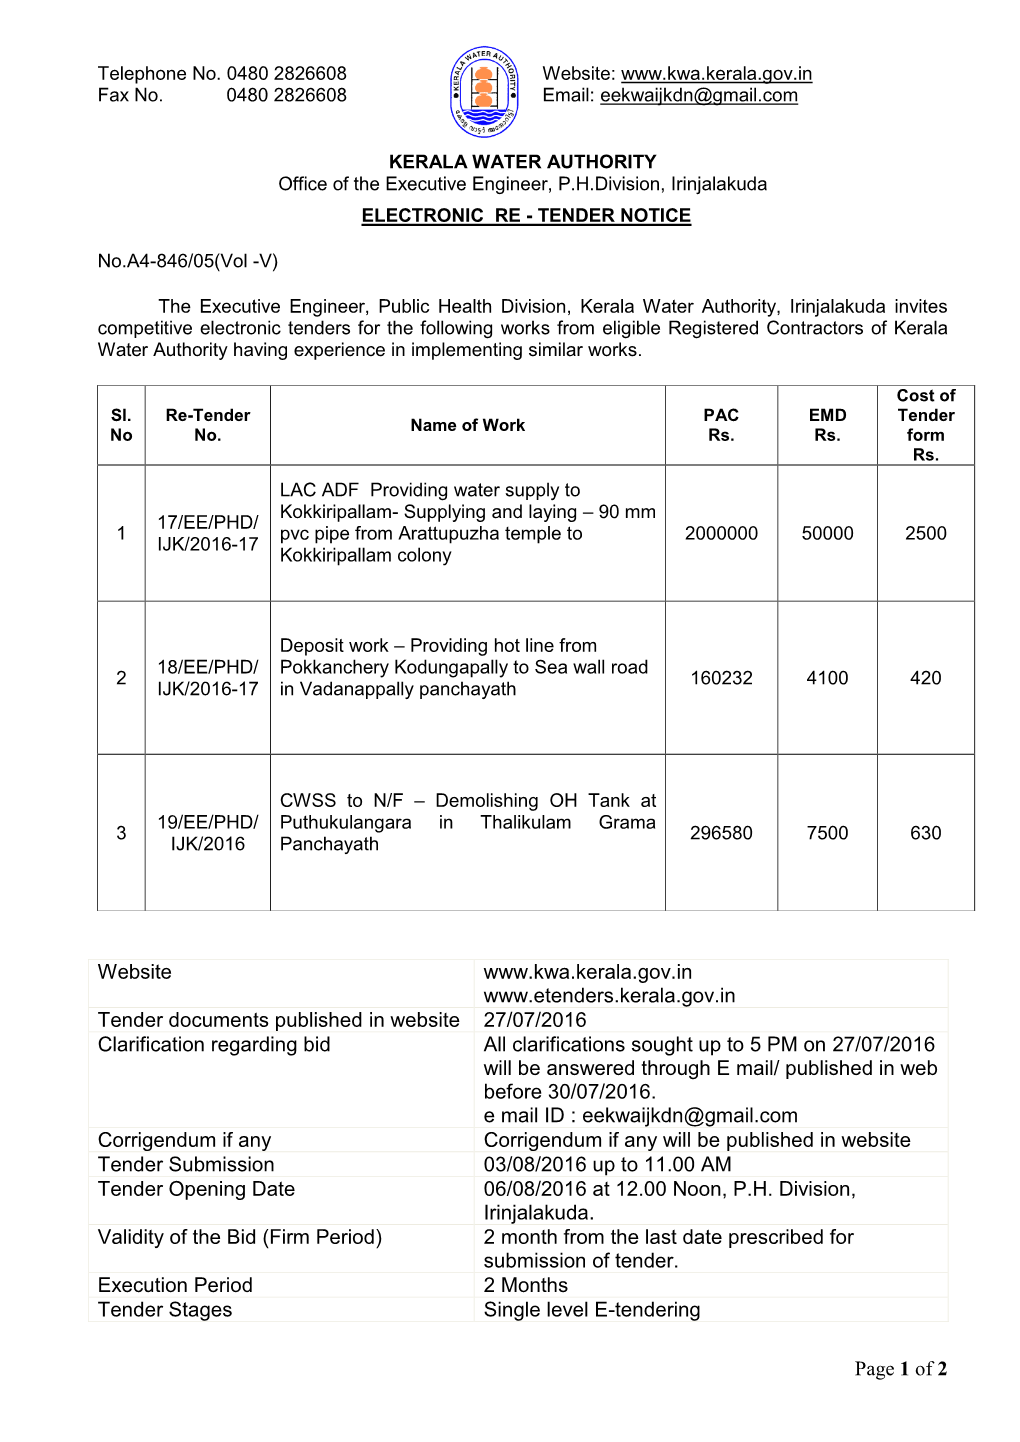 KERALA WATER AUTHORITY Office of the Executive Engineer, P.H.Division, Irinjalakuda ELECTRONIC RE - TENDER NOTICE